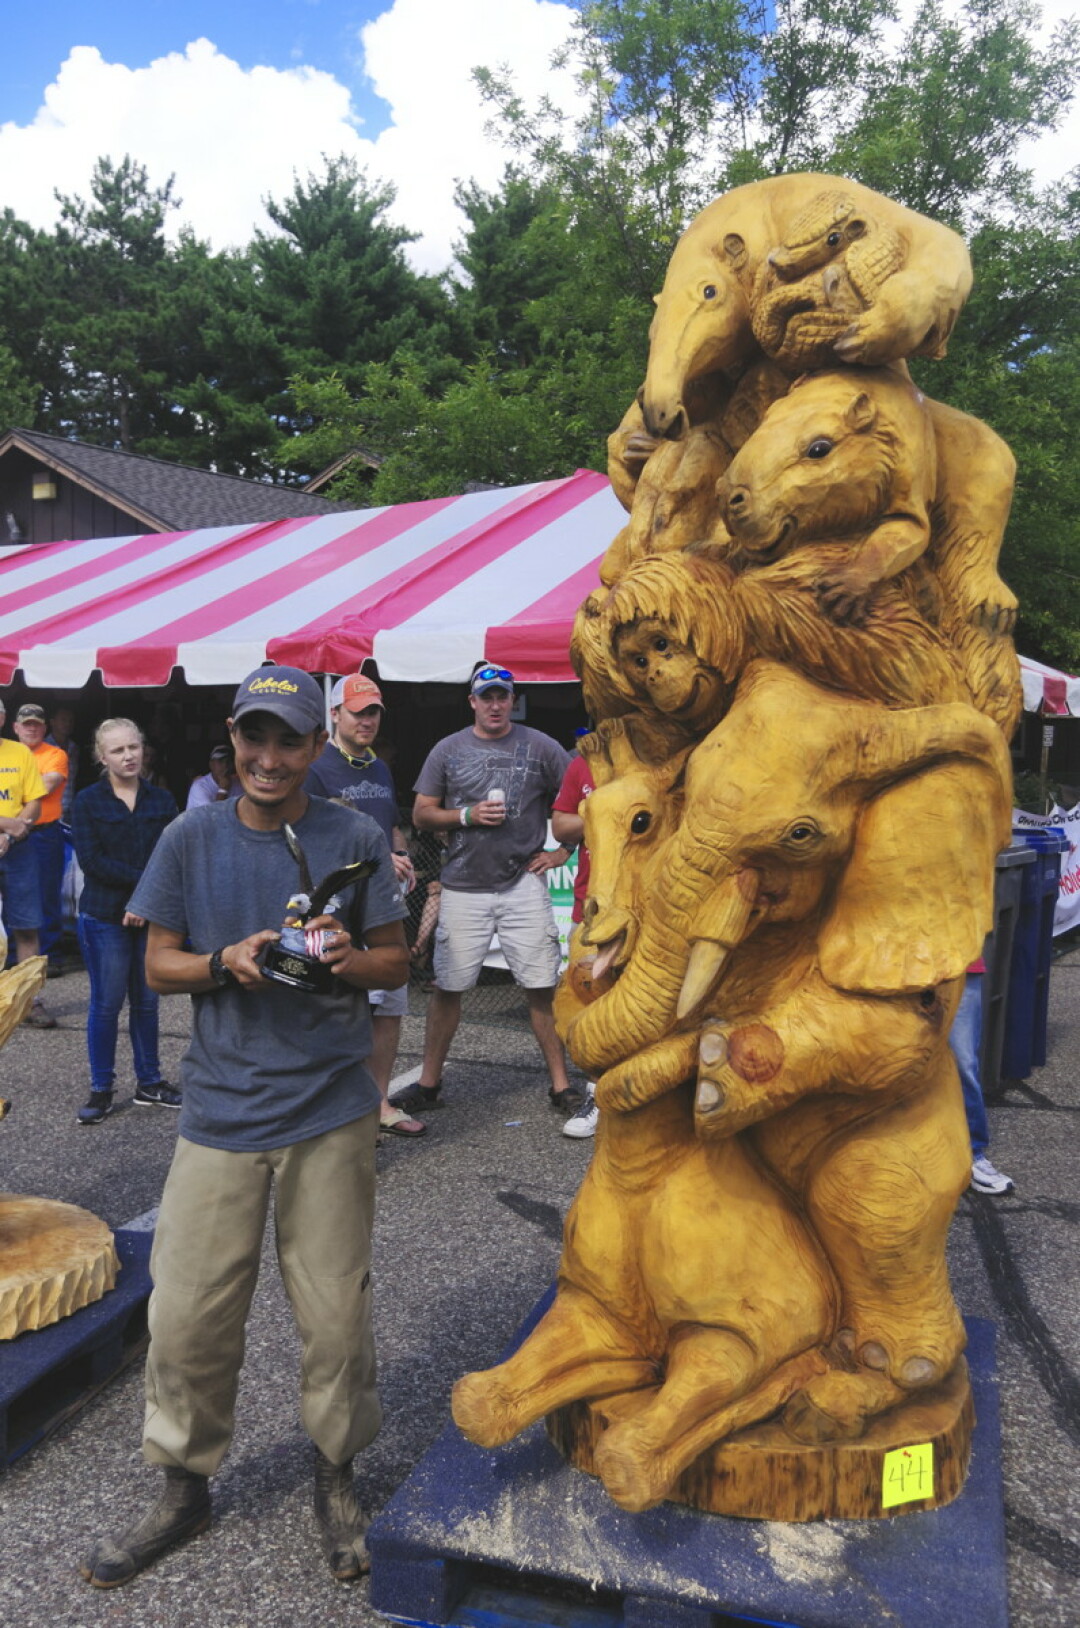 HOW MUCH WOOD COULD A CHAINSAW SAW? Takao Hayashi of Japan won first place at the U.S. Open Chainsaw Sculpture Championship in Eau Claire’s Carson Park, Aug. 4-7.